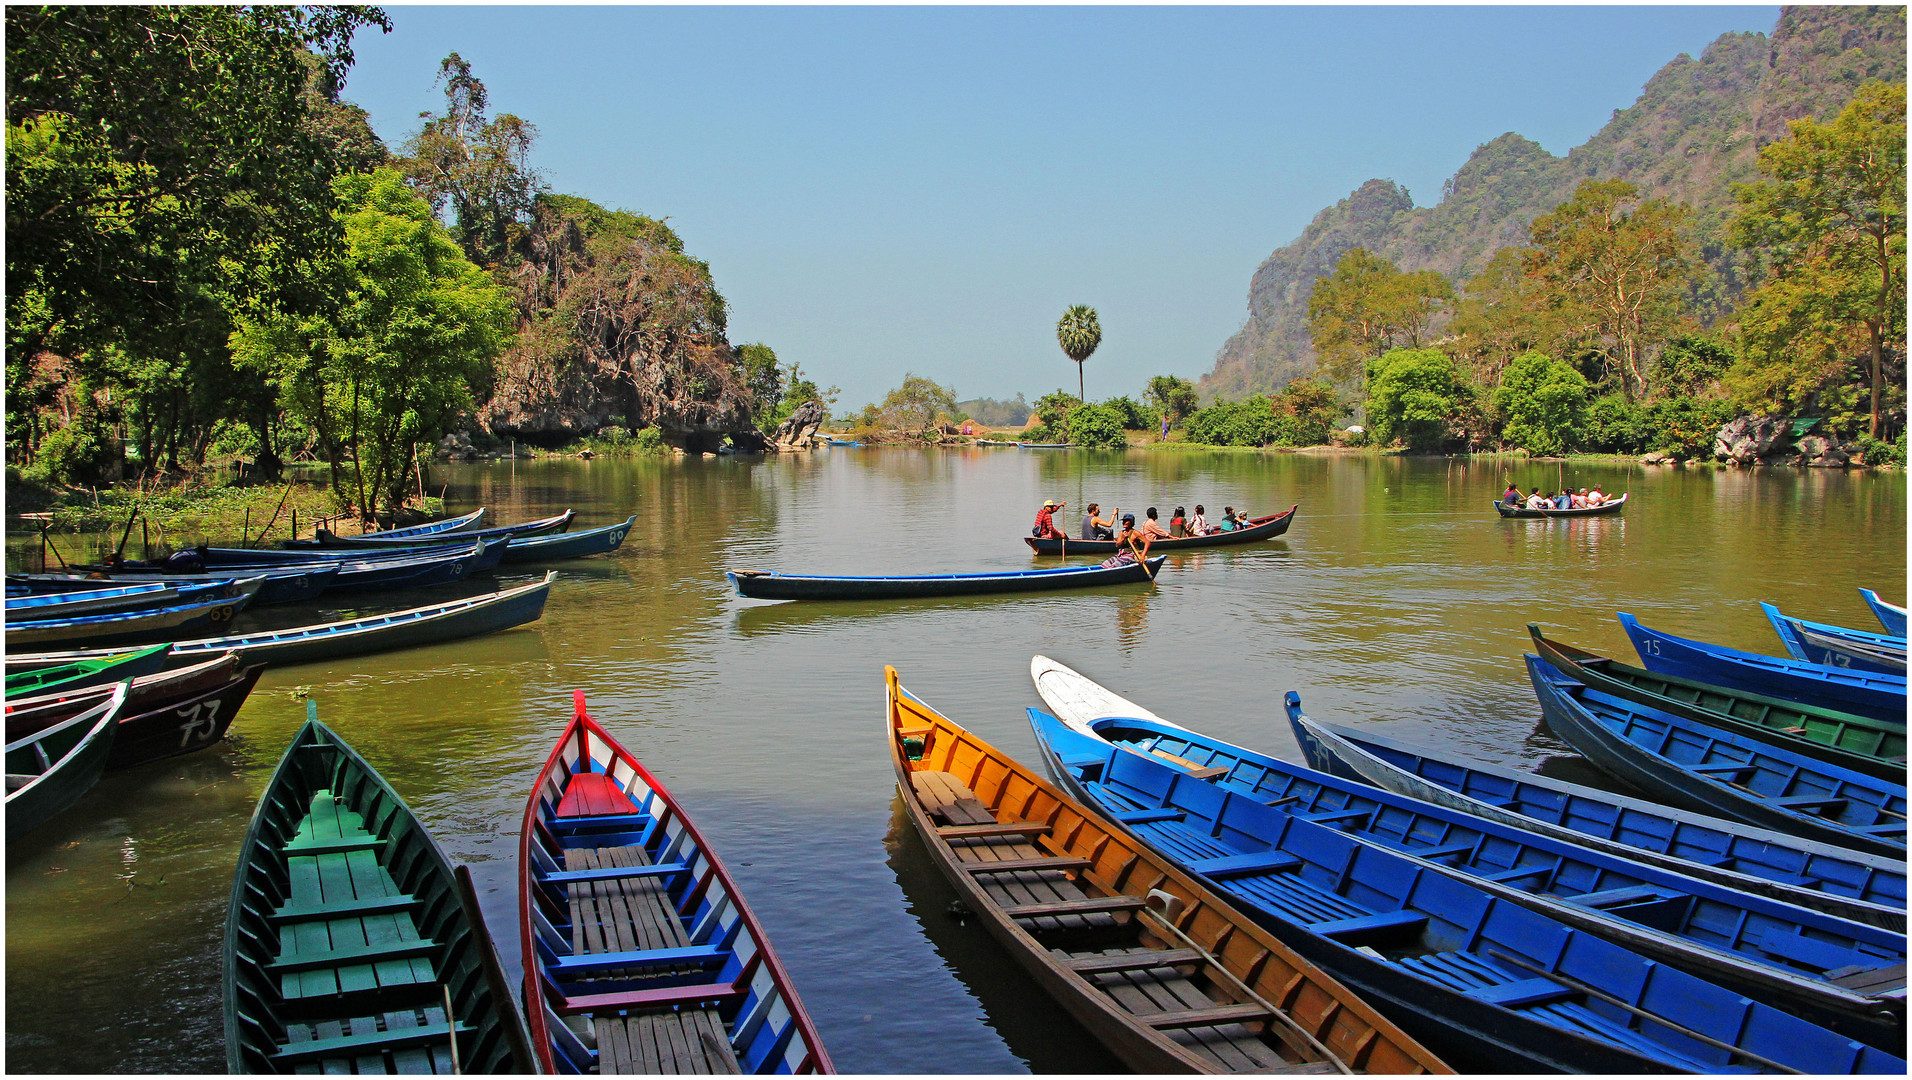 Hpa An 7